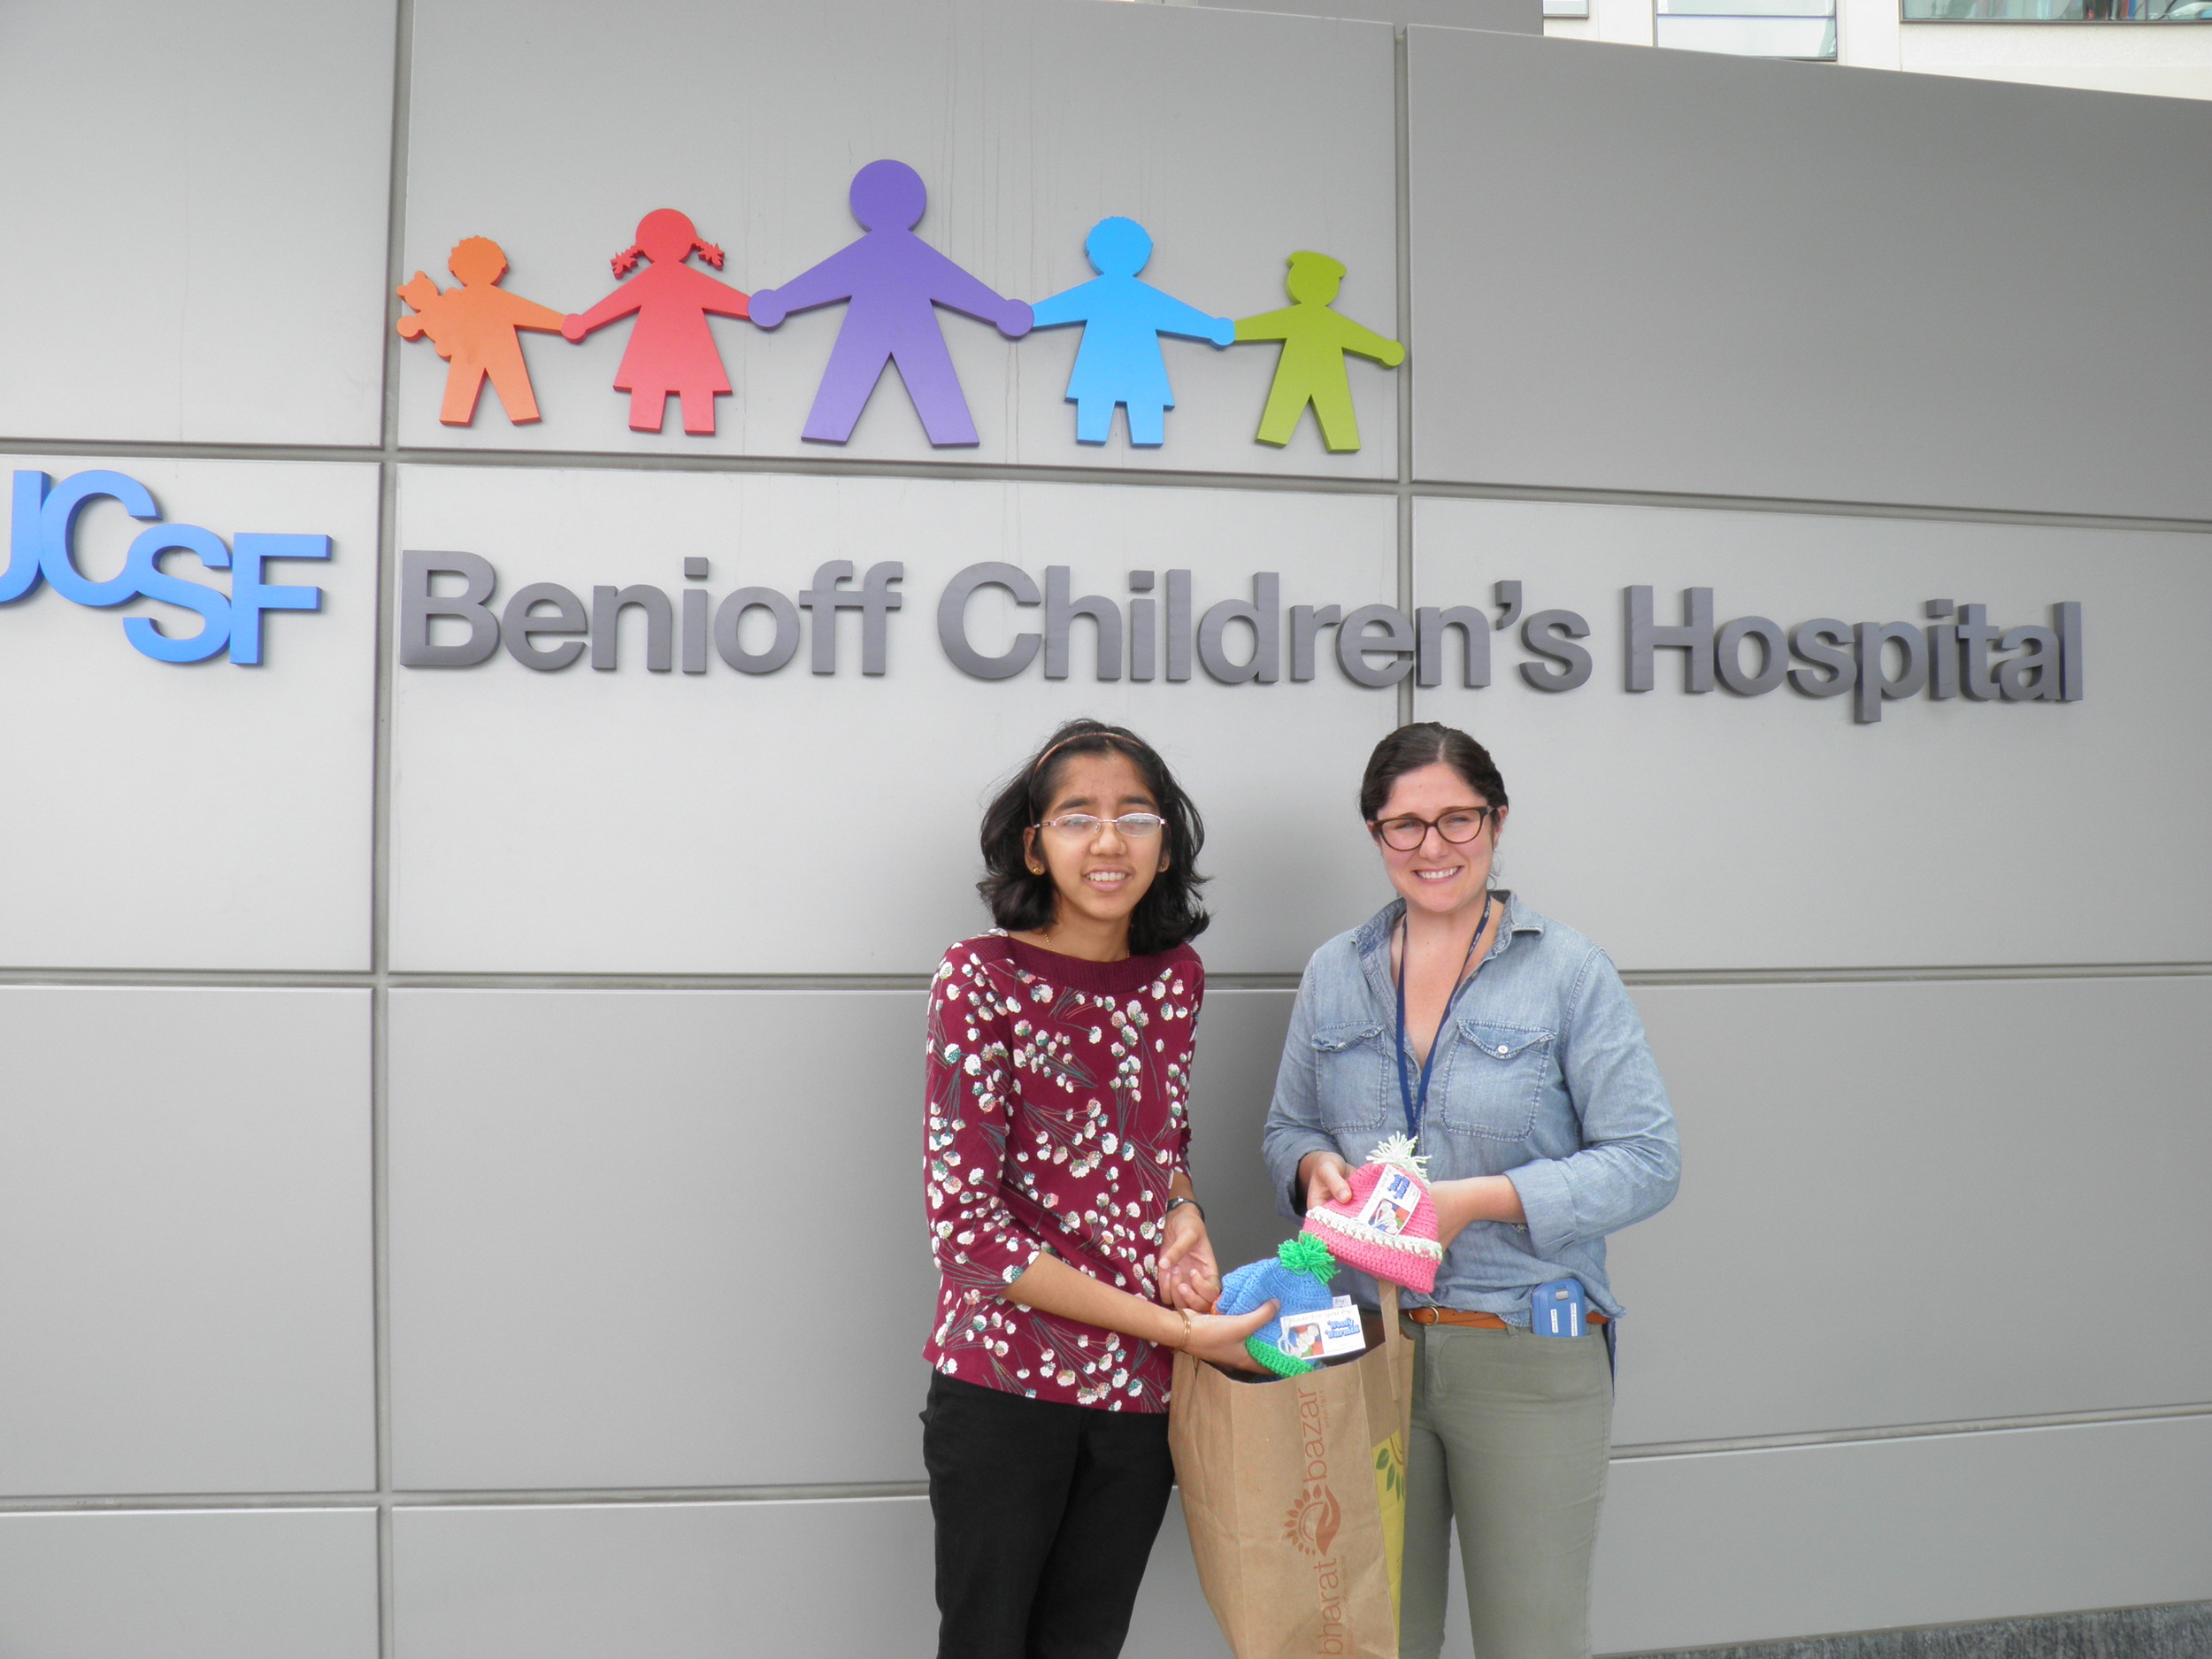 With Ms. Ashely Goliti, Child Life Services, UCSF Benioff Children's Hospital